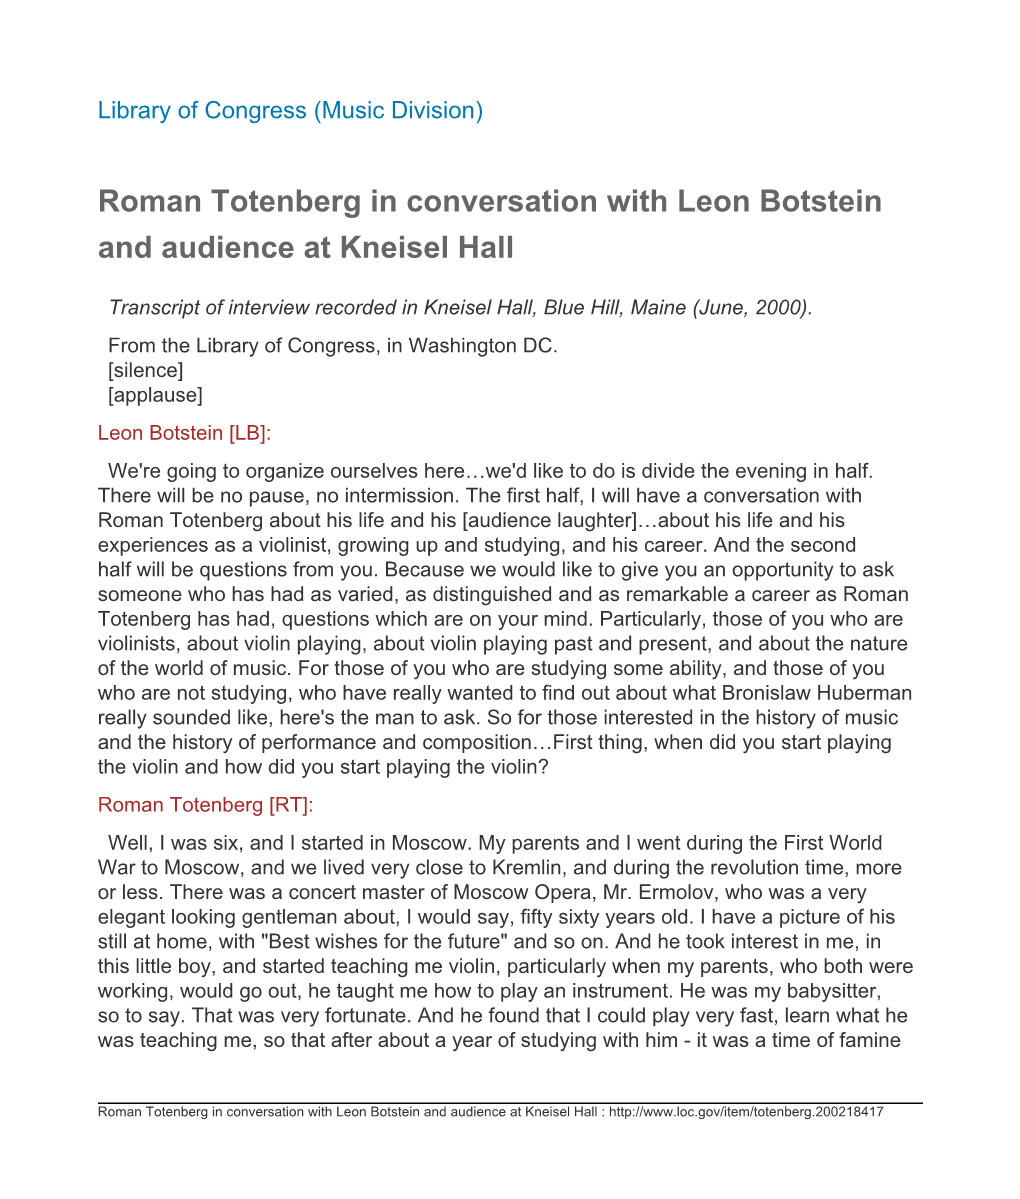 Roman Totenberg in Conversation with Leon Botstein and Audience at Kneisel Hall